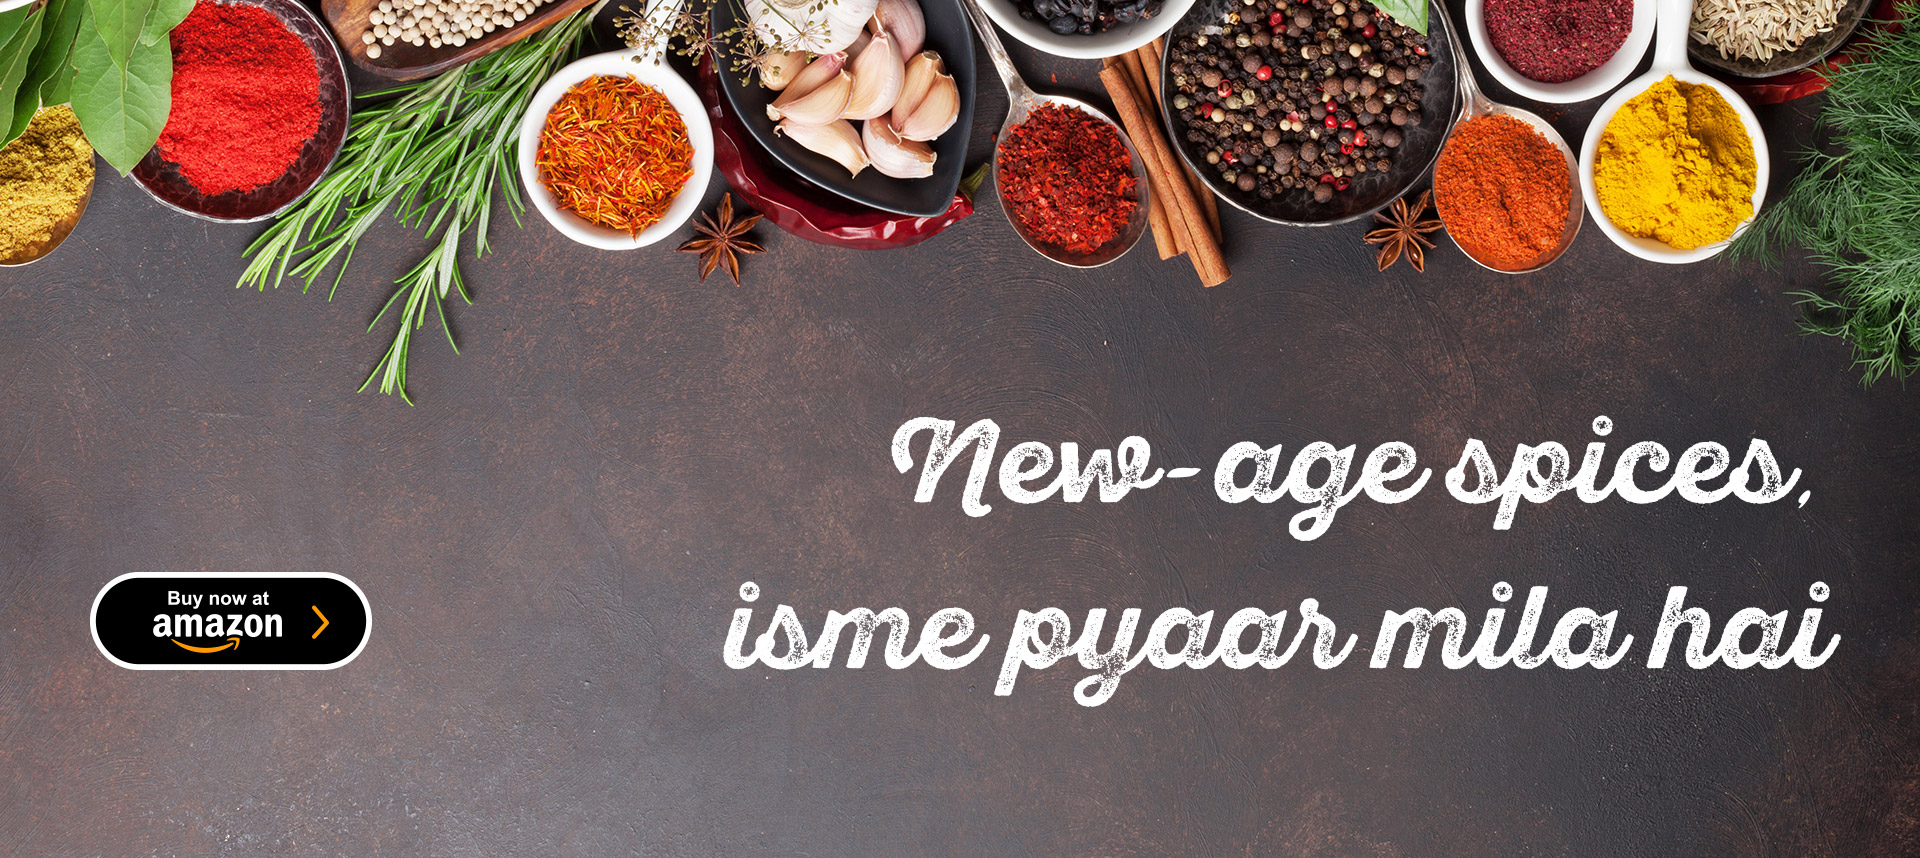 New Age spices Banner